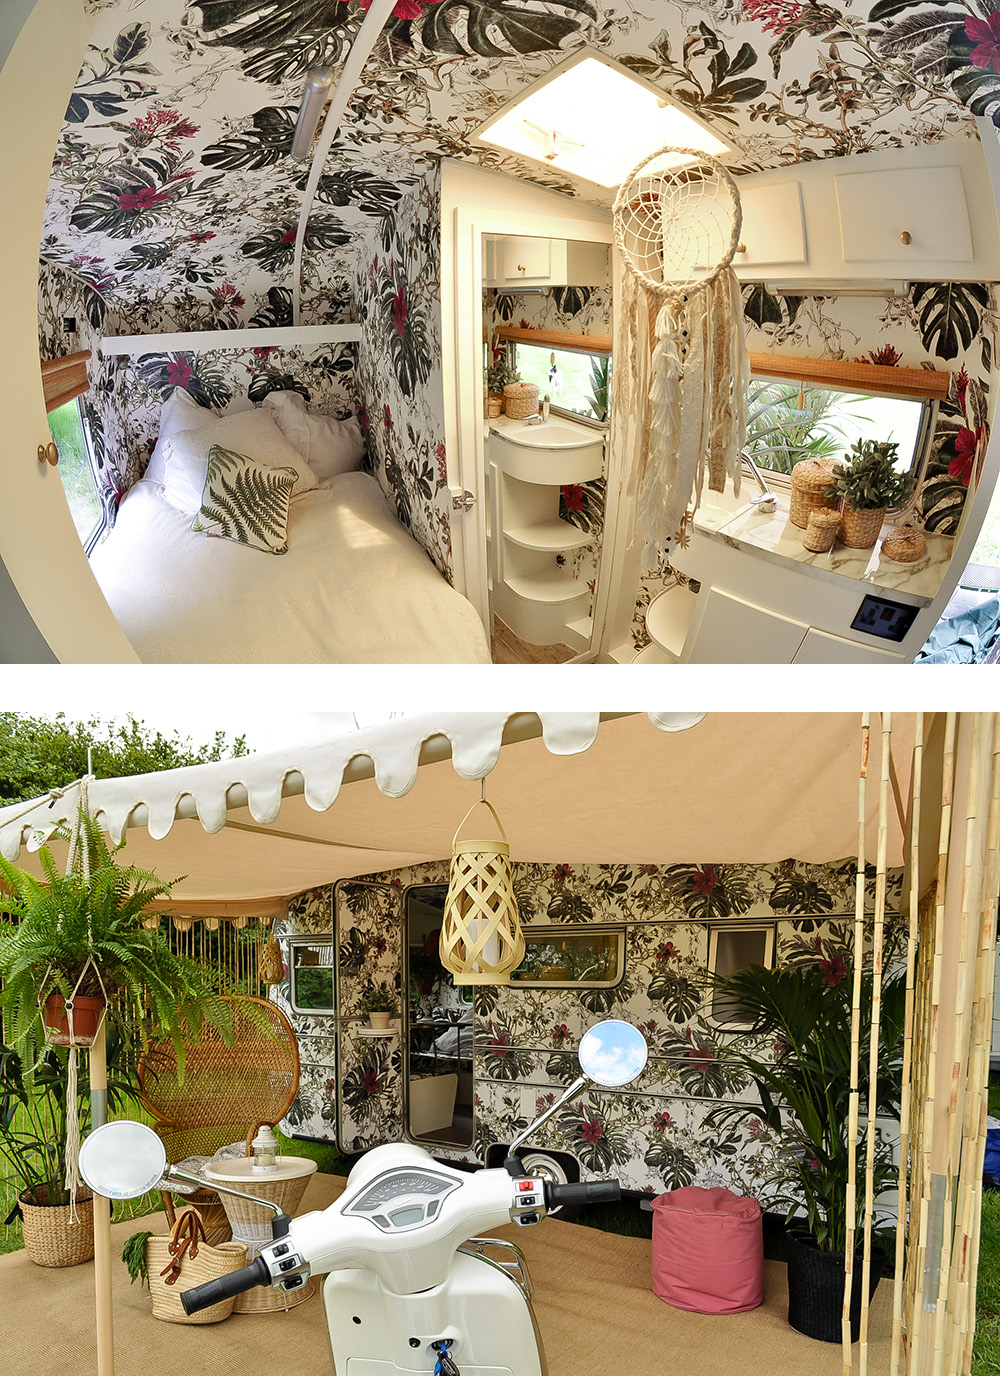 Glamourous, trendy and visually stunning are not words you hear too often in the caravan world. But along came ‘Brigitte’ – the glamavan who now calls St Tropez her home. Bought for £250 from eBay and transformed into a bohemian paradise by her owner, interior designer and blogger, Jane Ashton.